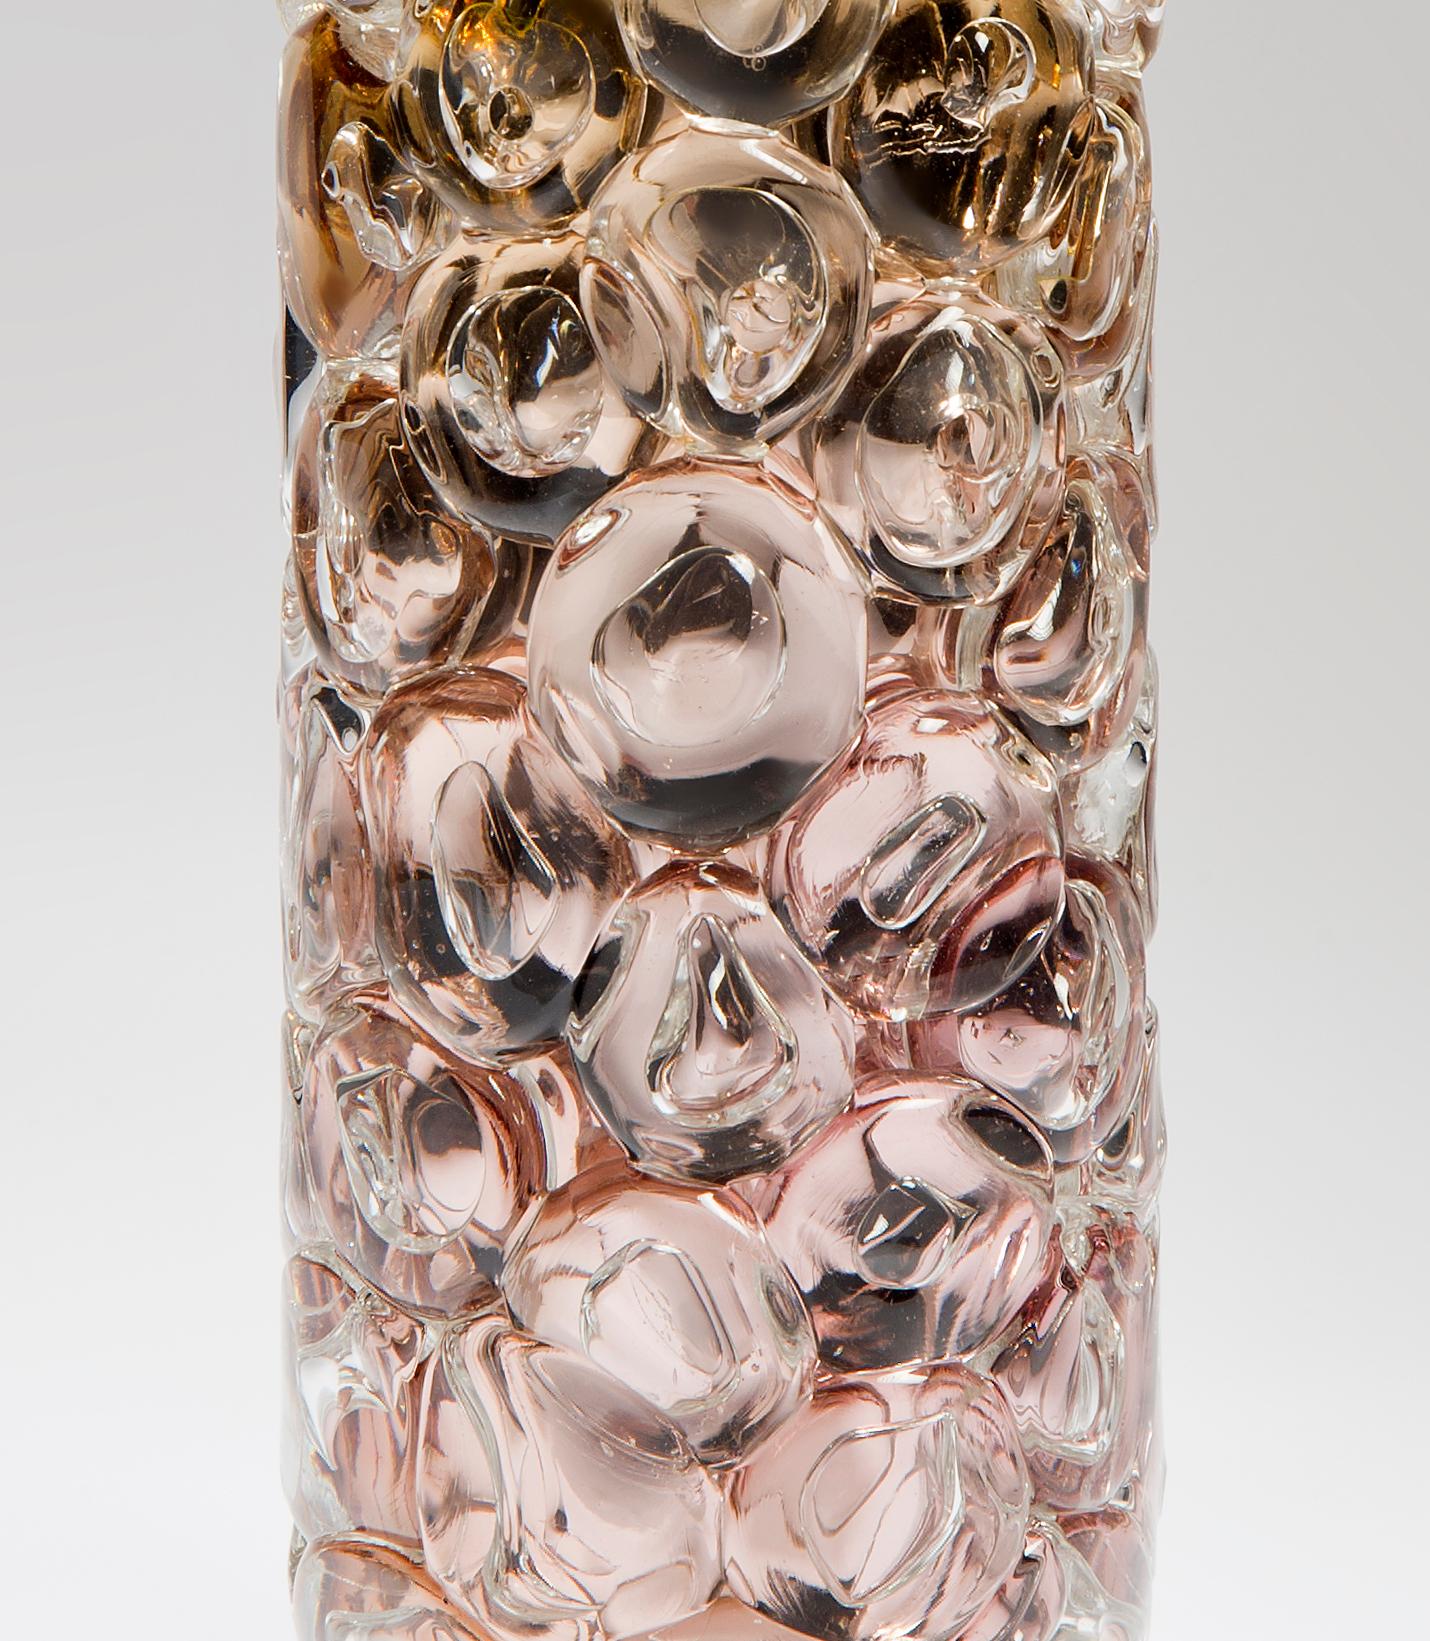 Bubblewrap in Gold, a Unique pink, gold & silver glass Vase by Allister Malcolm 1